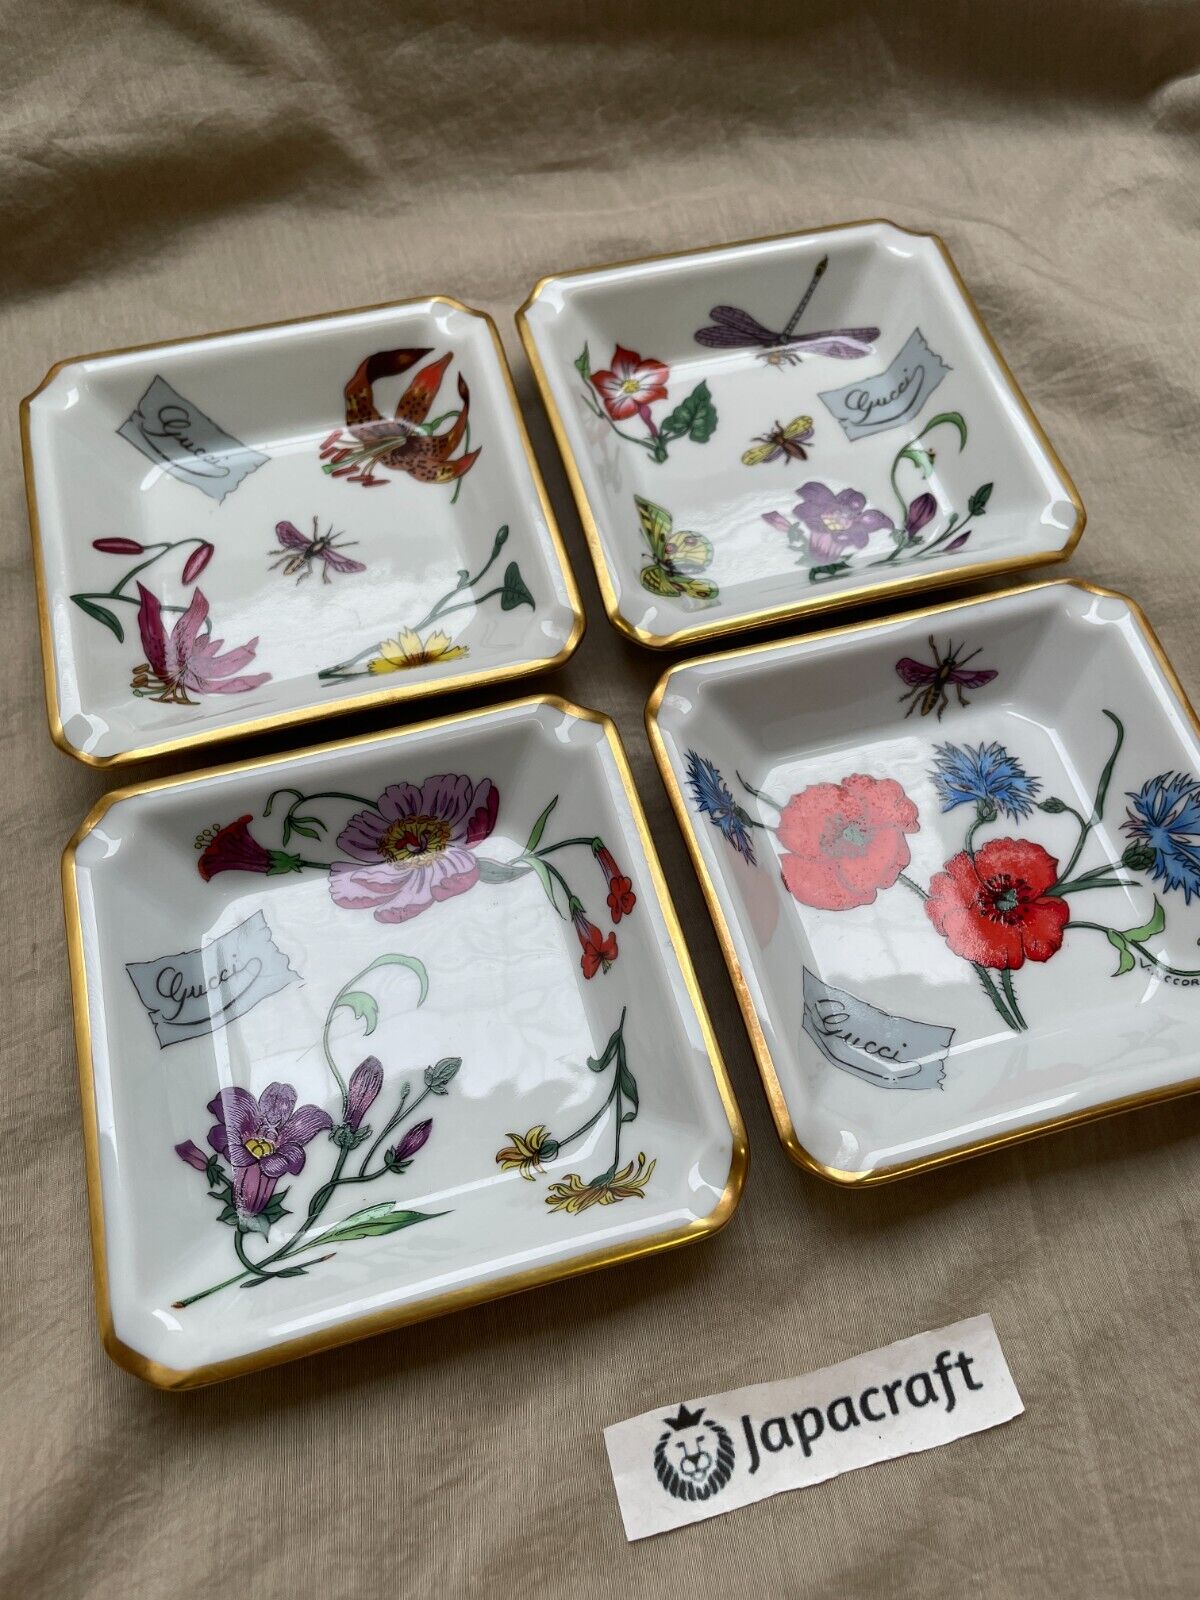 Vintage Gucci Bernardaud Limoges Ashtray set of 4 Floral Insects Gold Trim